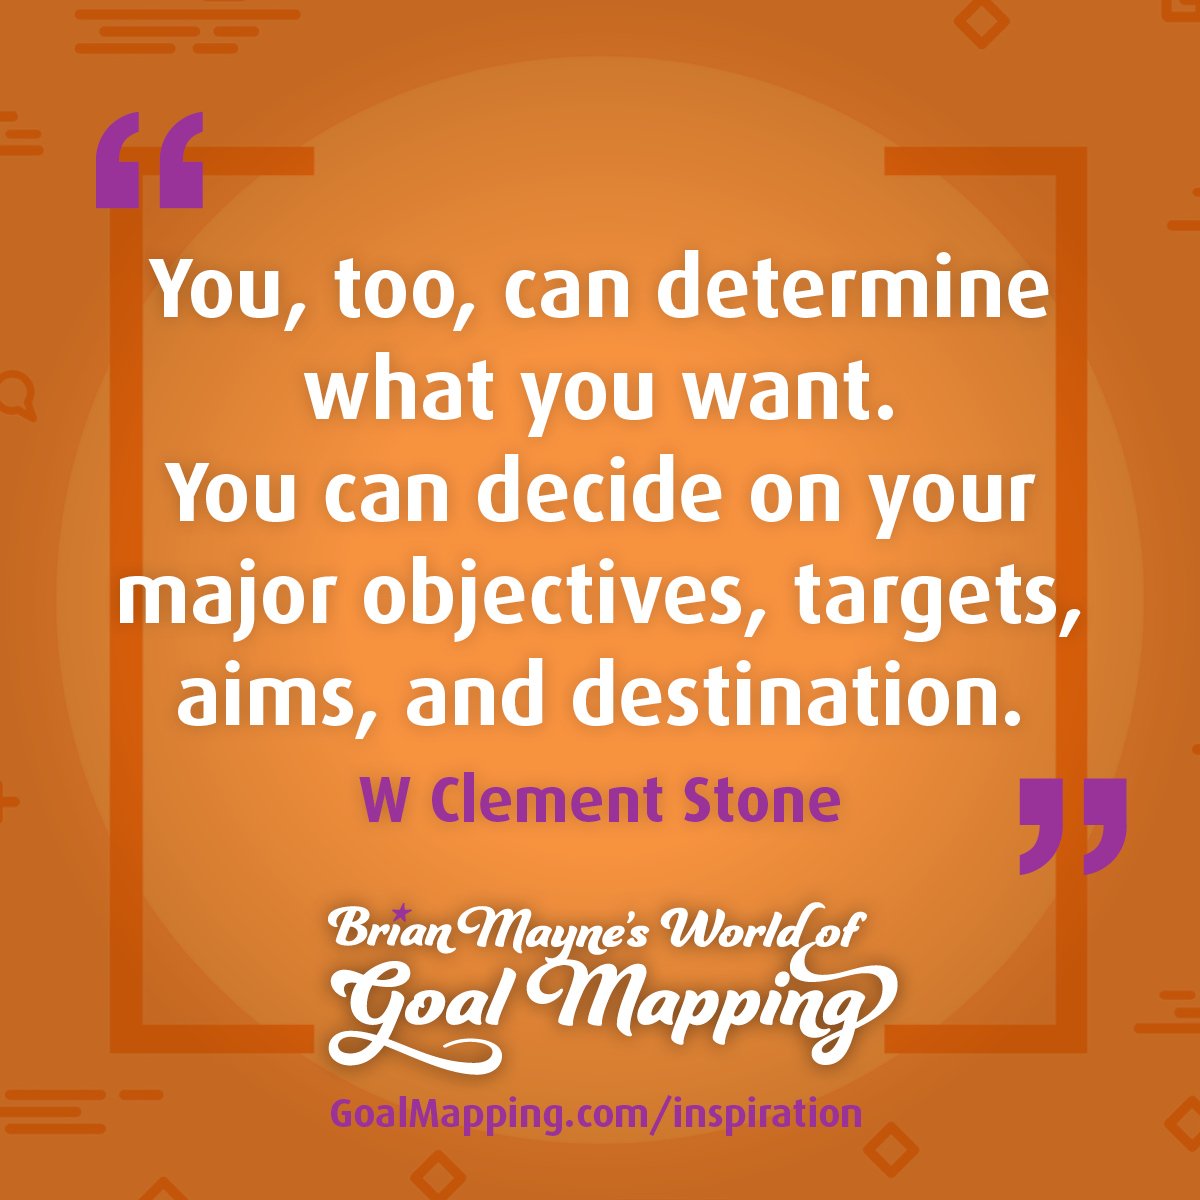 "You, too, can determine what you want. You can decide on your major objectives, targets, aims, and destination." W Clement Stone